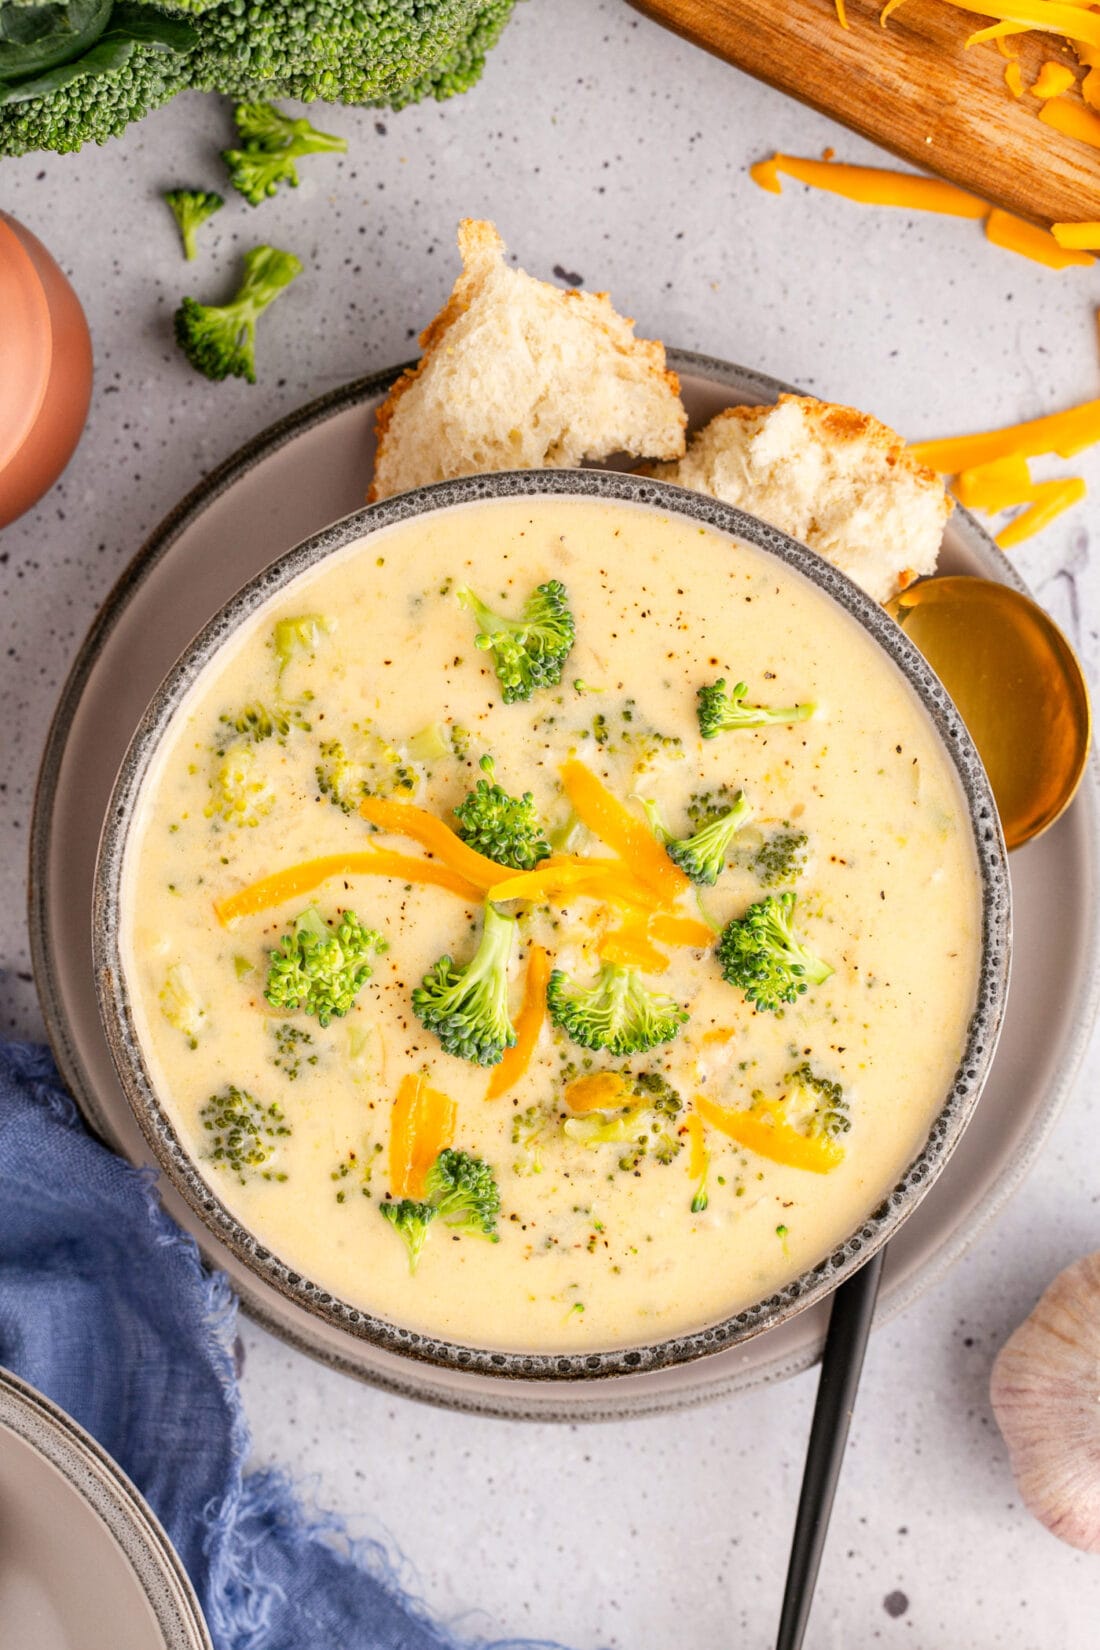 Overhead photo of a bowl of Instant Pot Broccoli Cheddar Soup with bread on the side